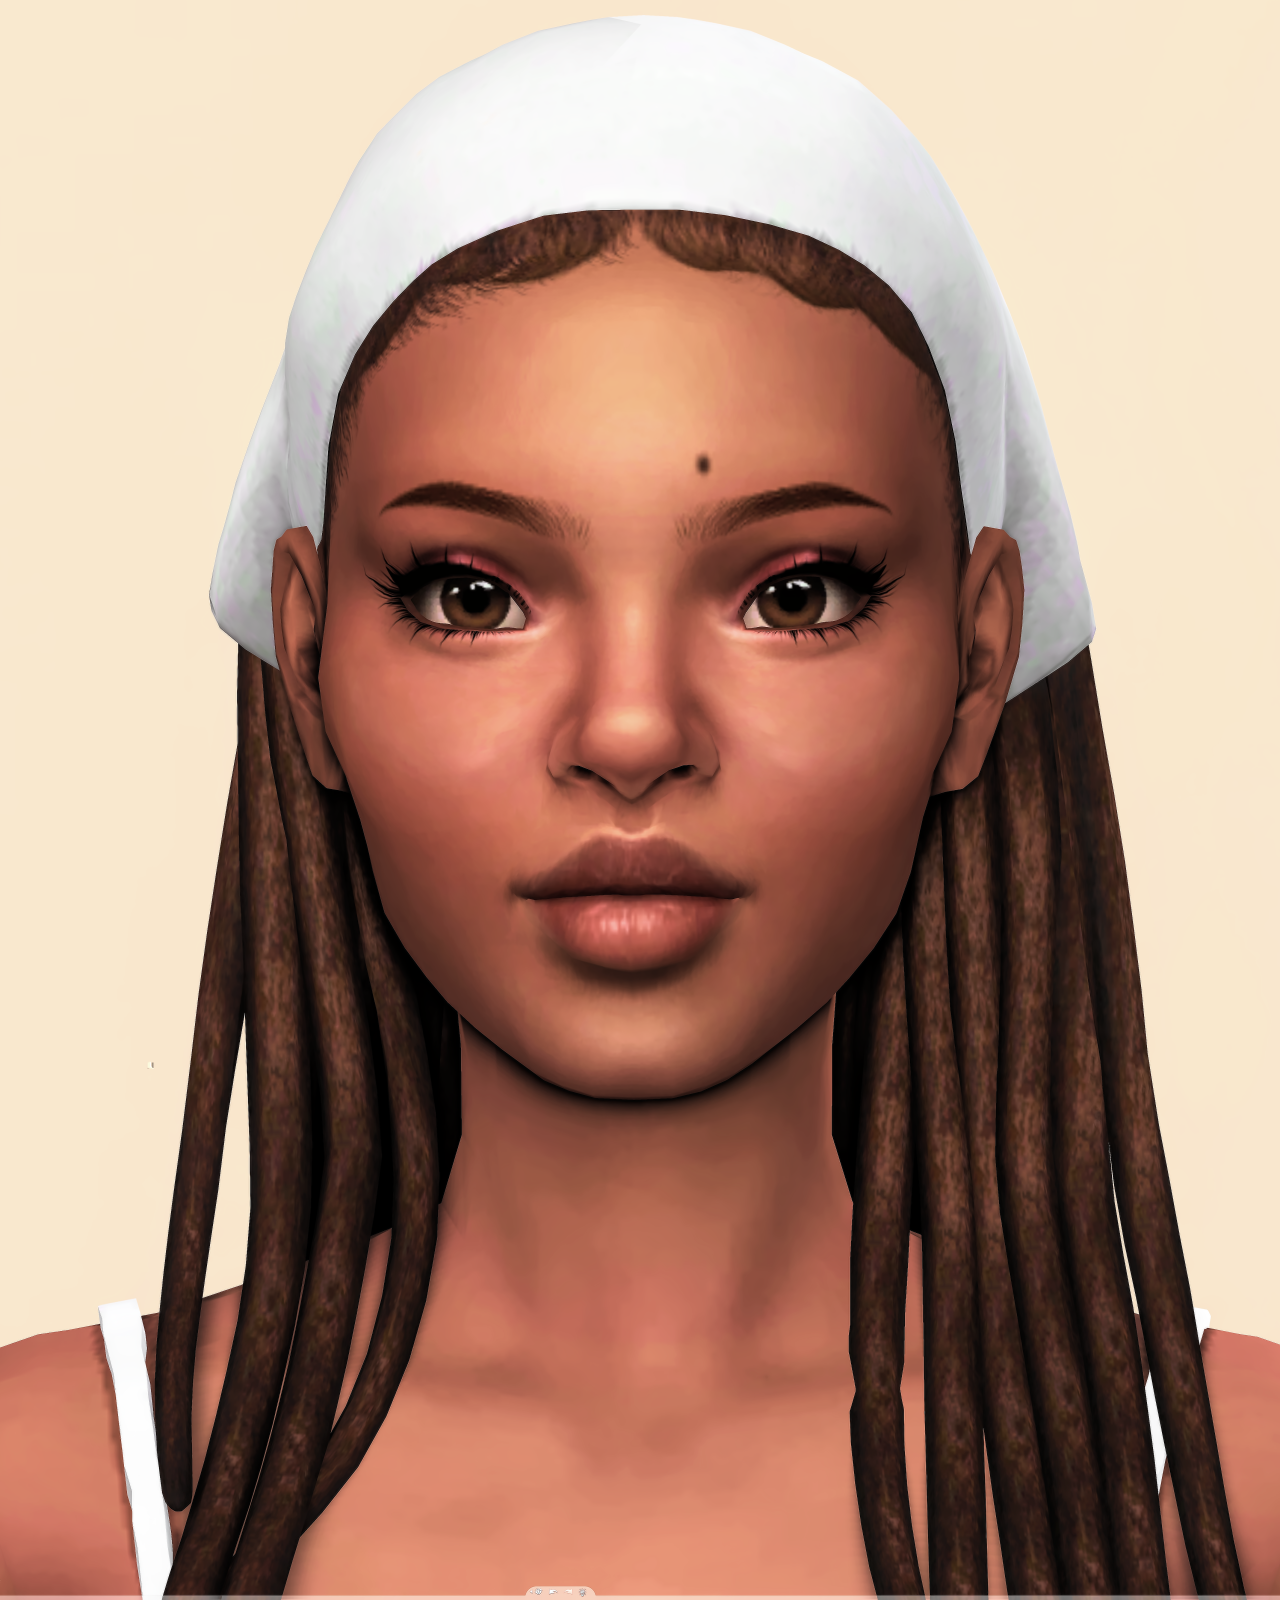 I made a few minor tweaks to Halle, I made her eyes darker and gave her ...